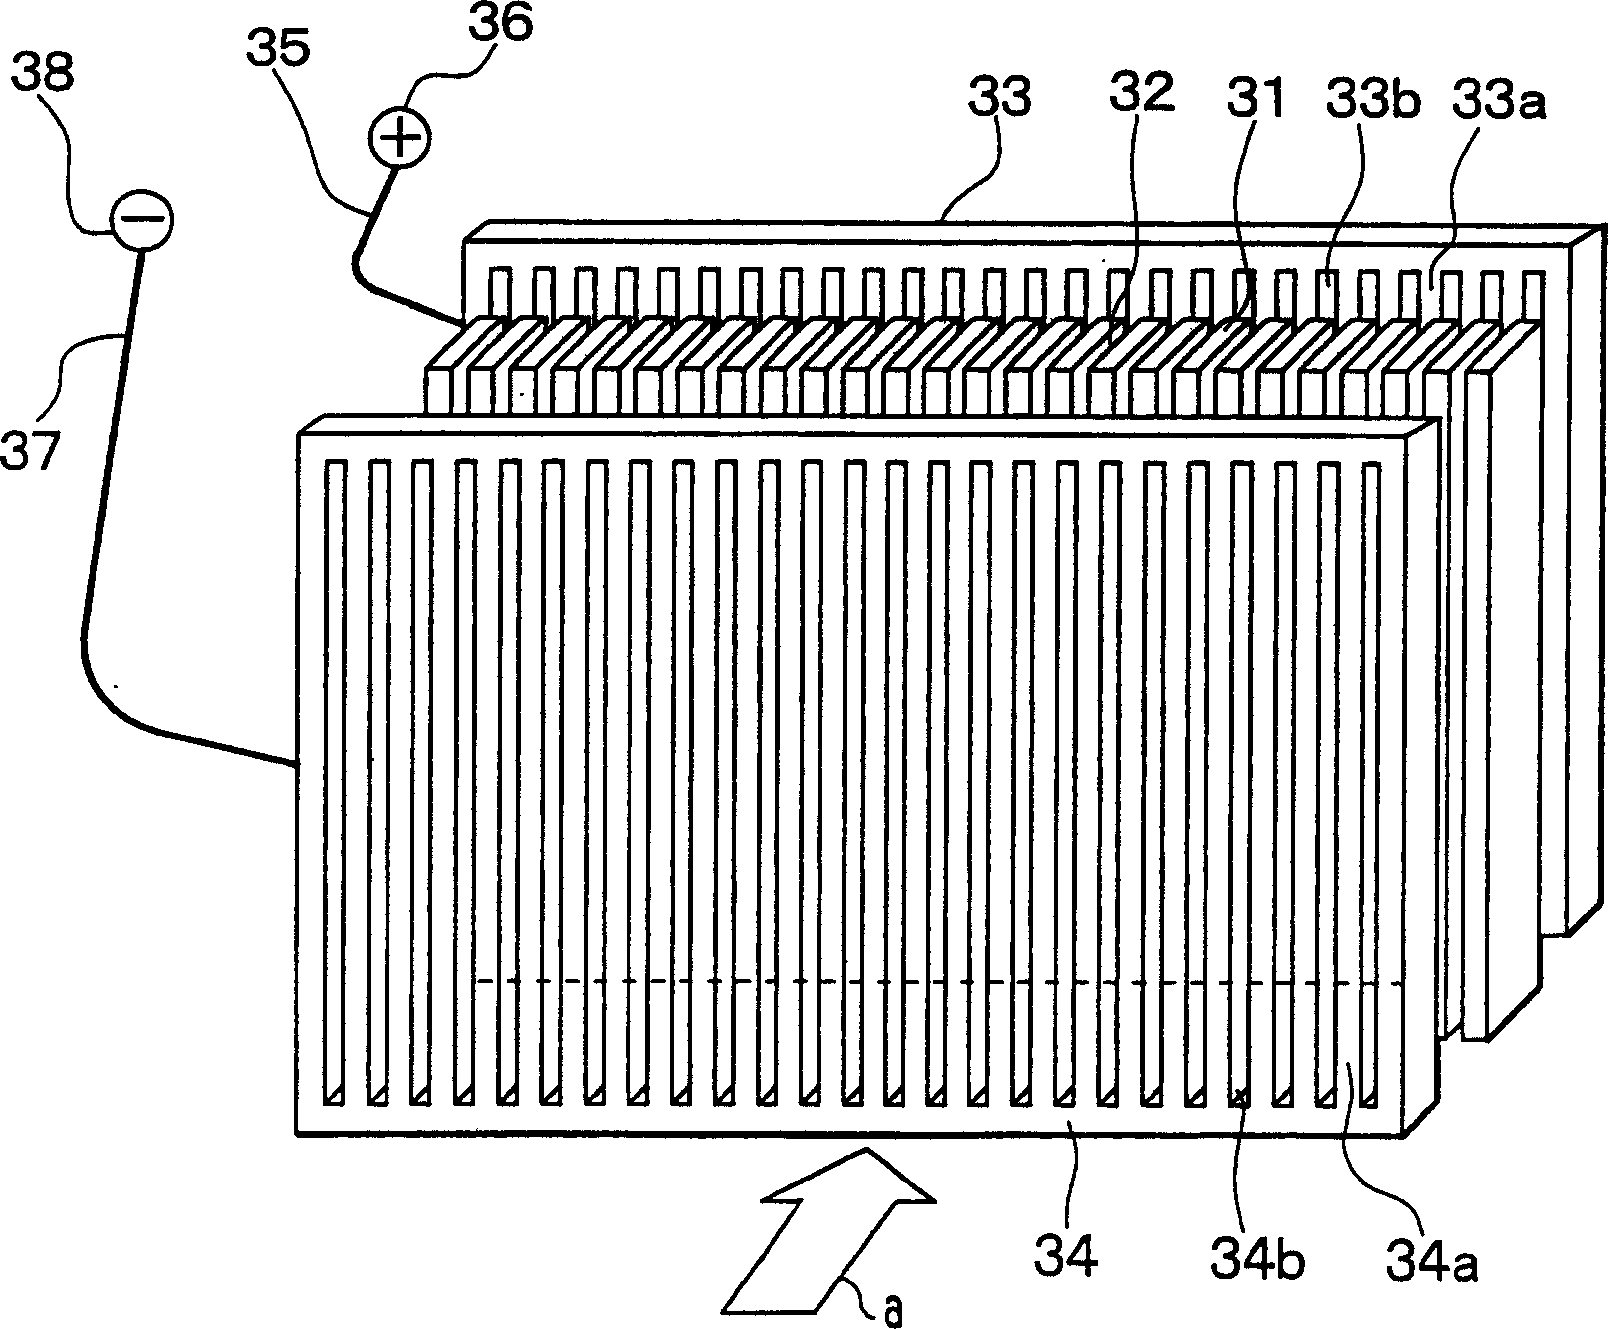 Electrical heater, heating heat exchanger and vehicle air conditioner